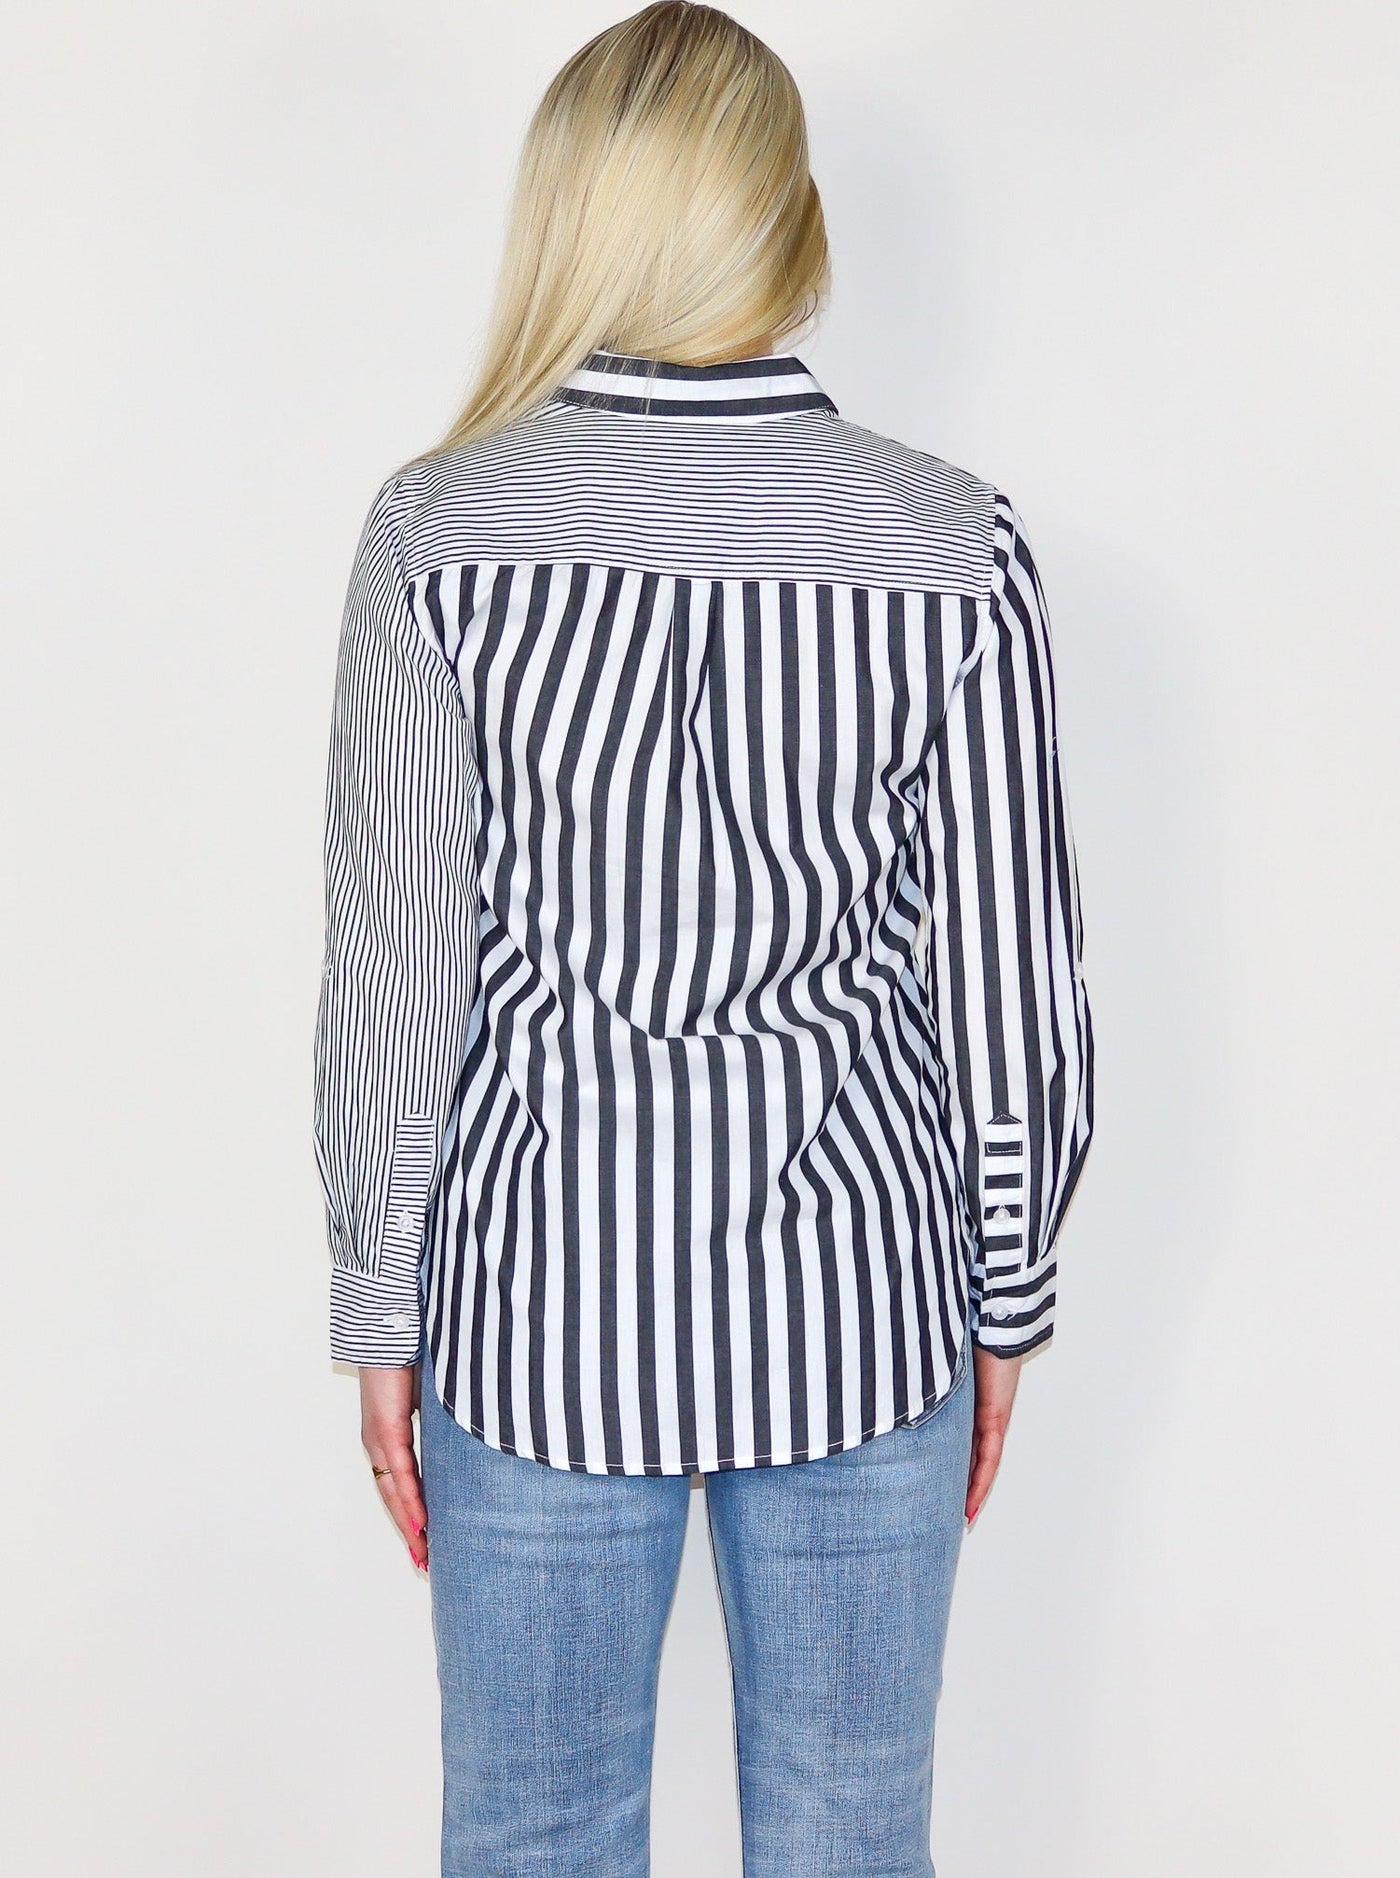 Model is wearing a vertical striped grey and white button up. The right side of the button ups stripes are fine and thin. The left side of the button ups stripes are big and thick. 